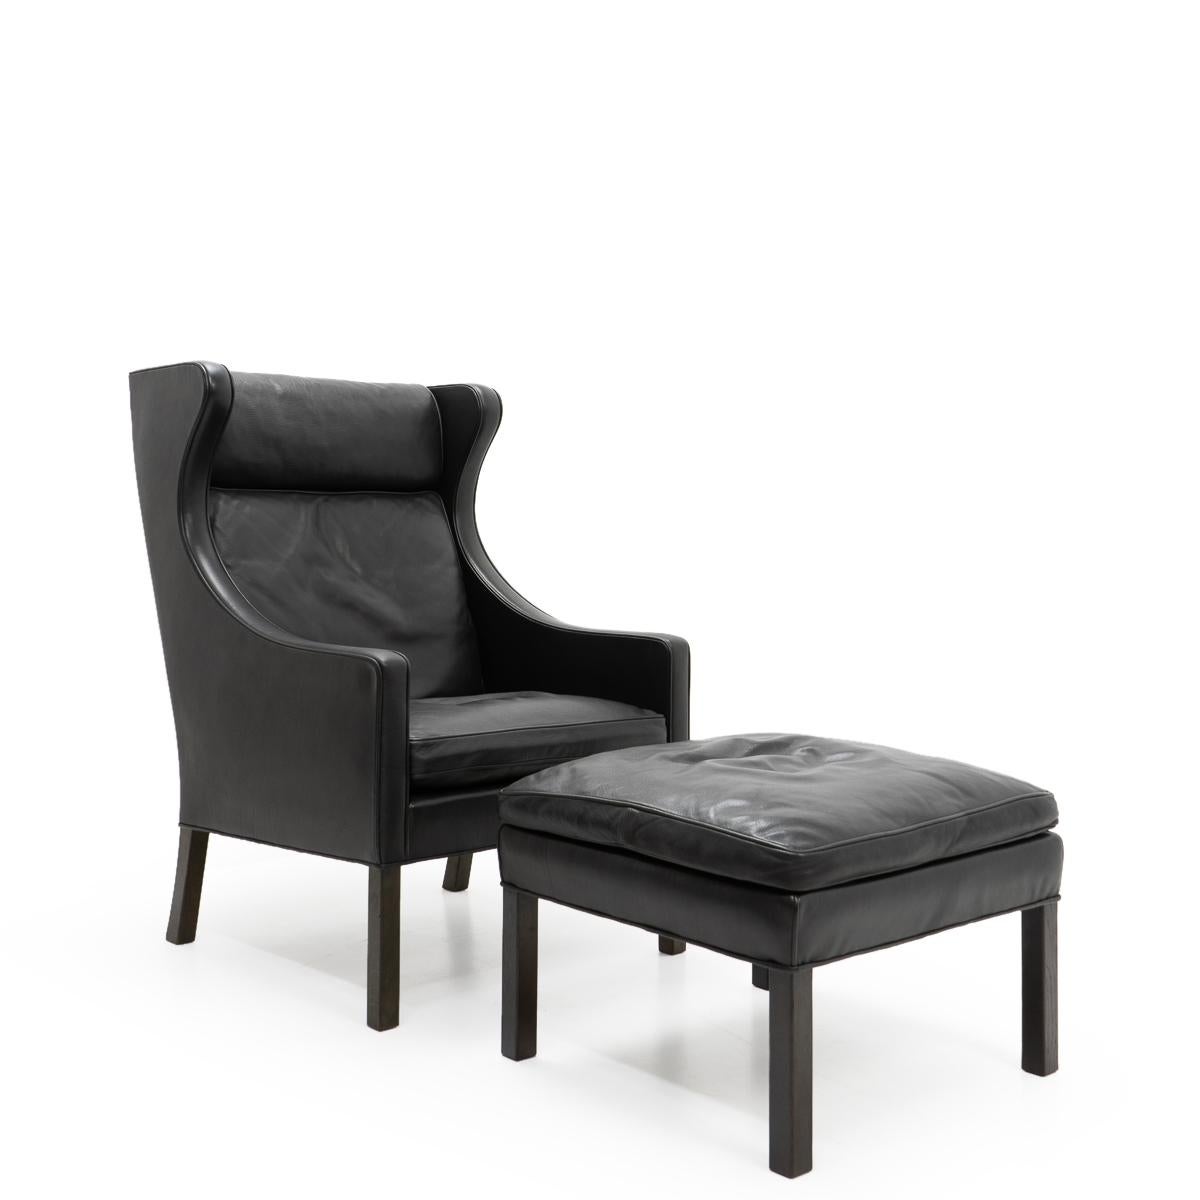 Wingchair by Borge Mogensen (model 2204) with ottoman (model 2202) in black leather, designed for Fredericia during the 1960s.

Produced during the early 1970s.

The set remain in very good condition, with some small signs of wear. Very